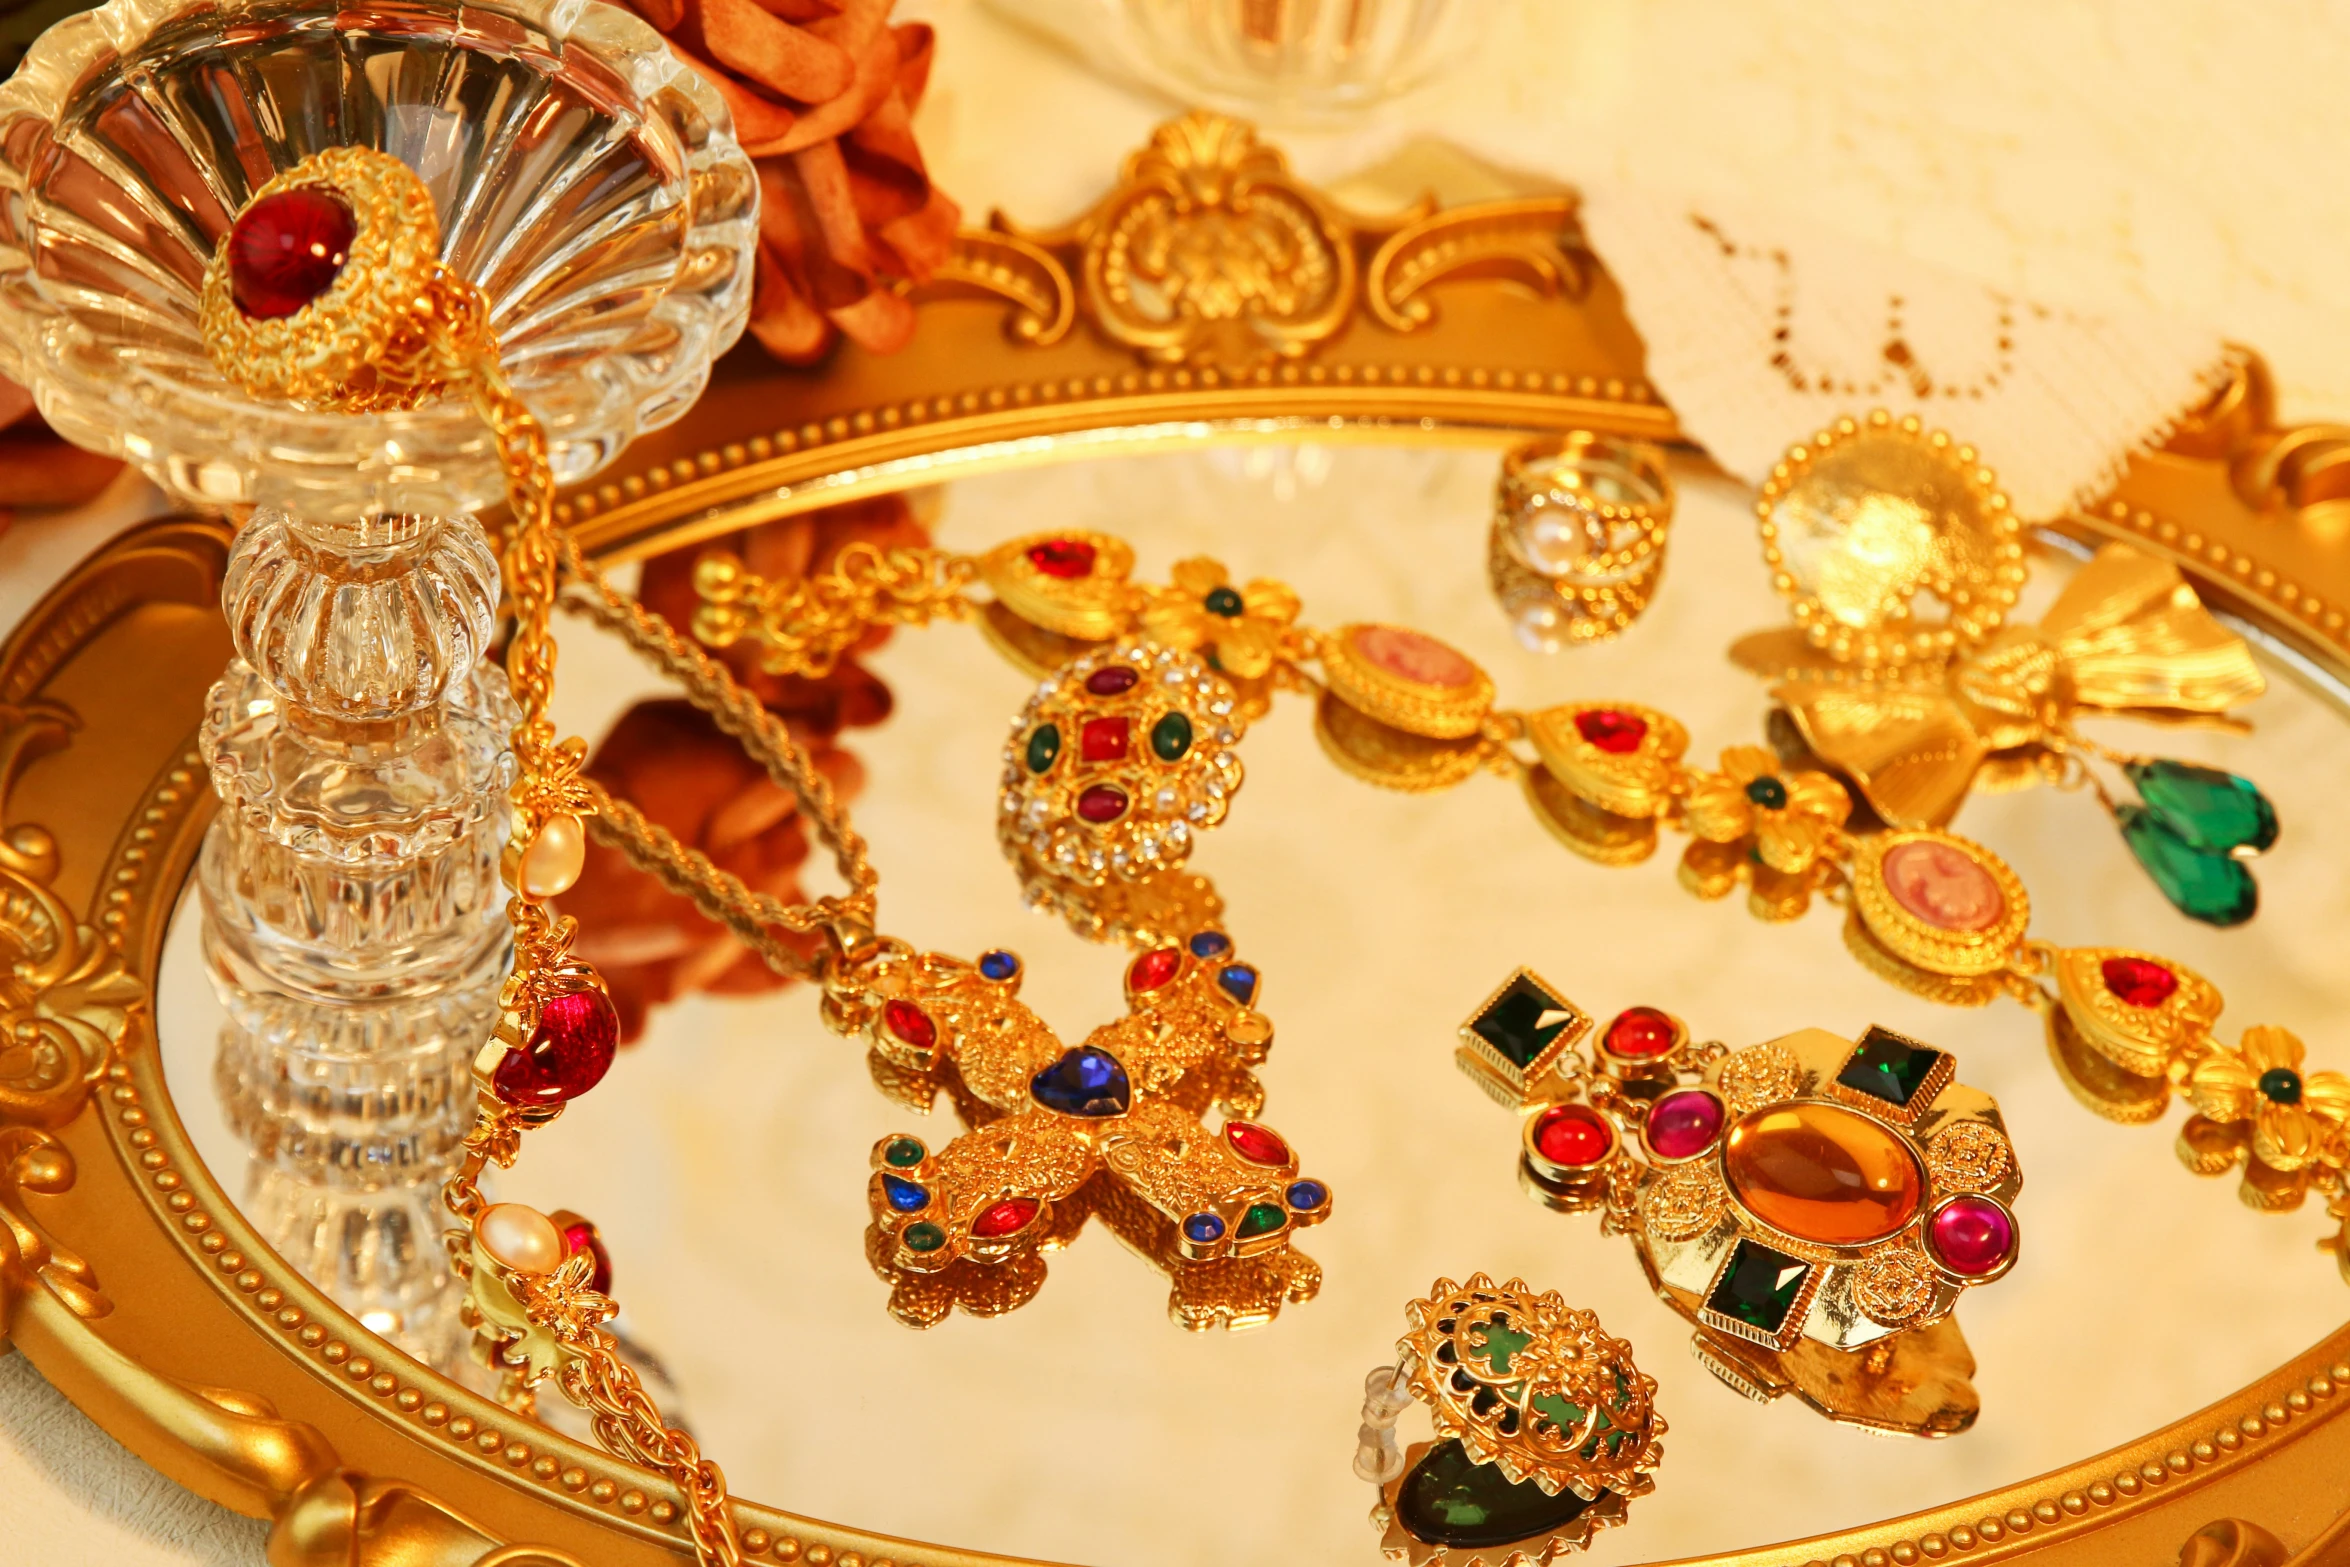 many colorful jewelry sets are in a tray